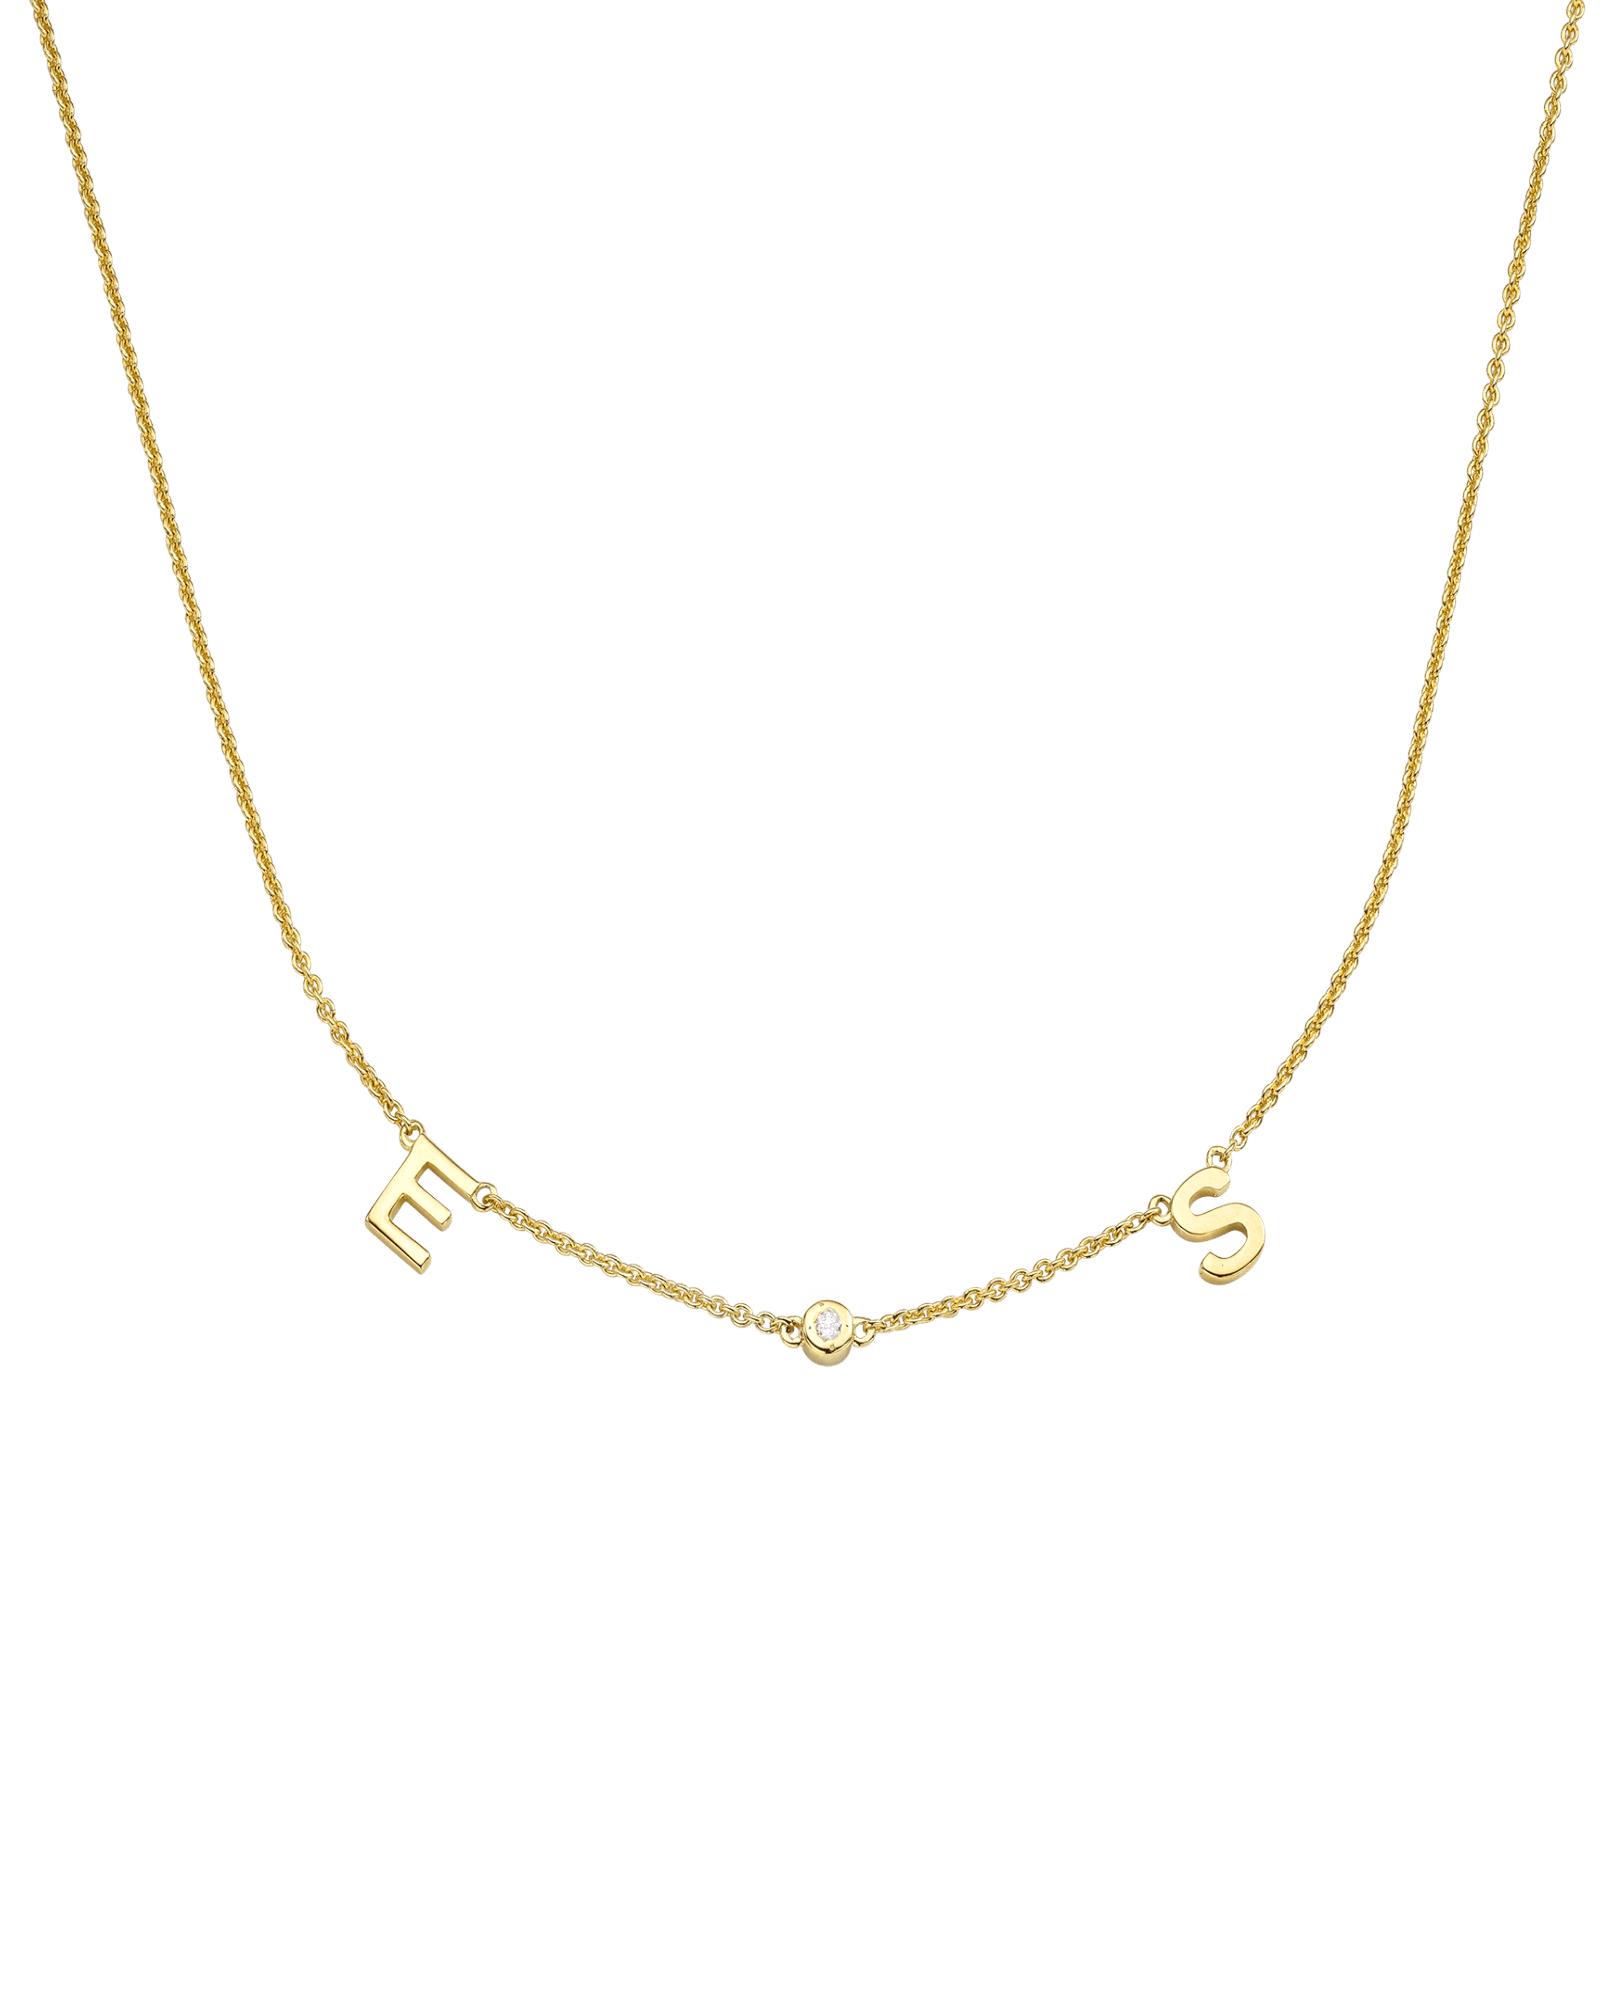 Initial Necklace with Diamonds - 14K Yellow Gold Necklaces magal-dev 1 Initial + 1 Diamond Adjustable 16-17" (40cm-43cm) 